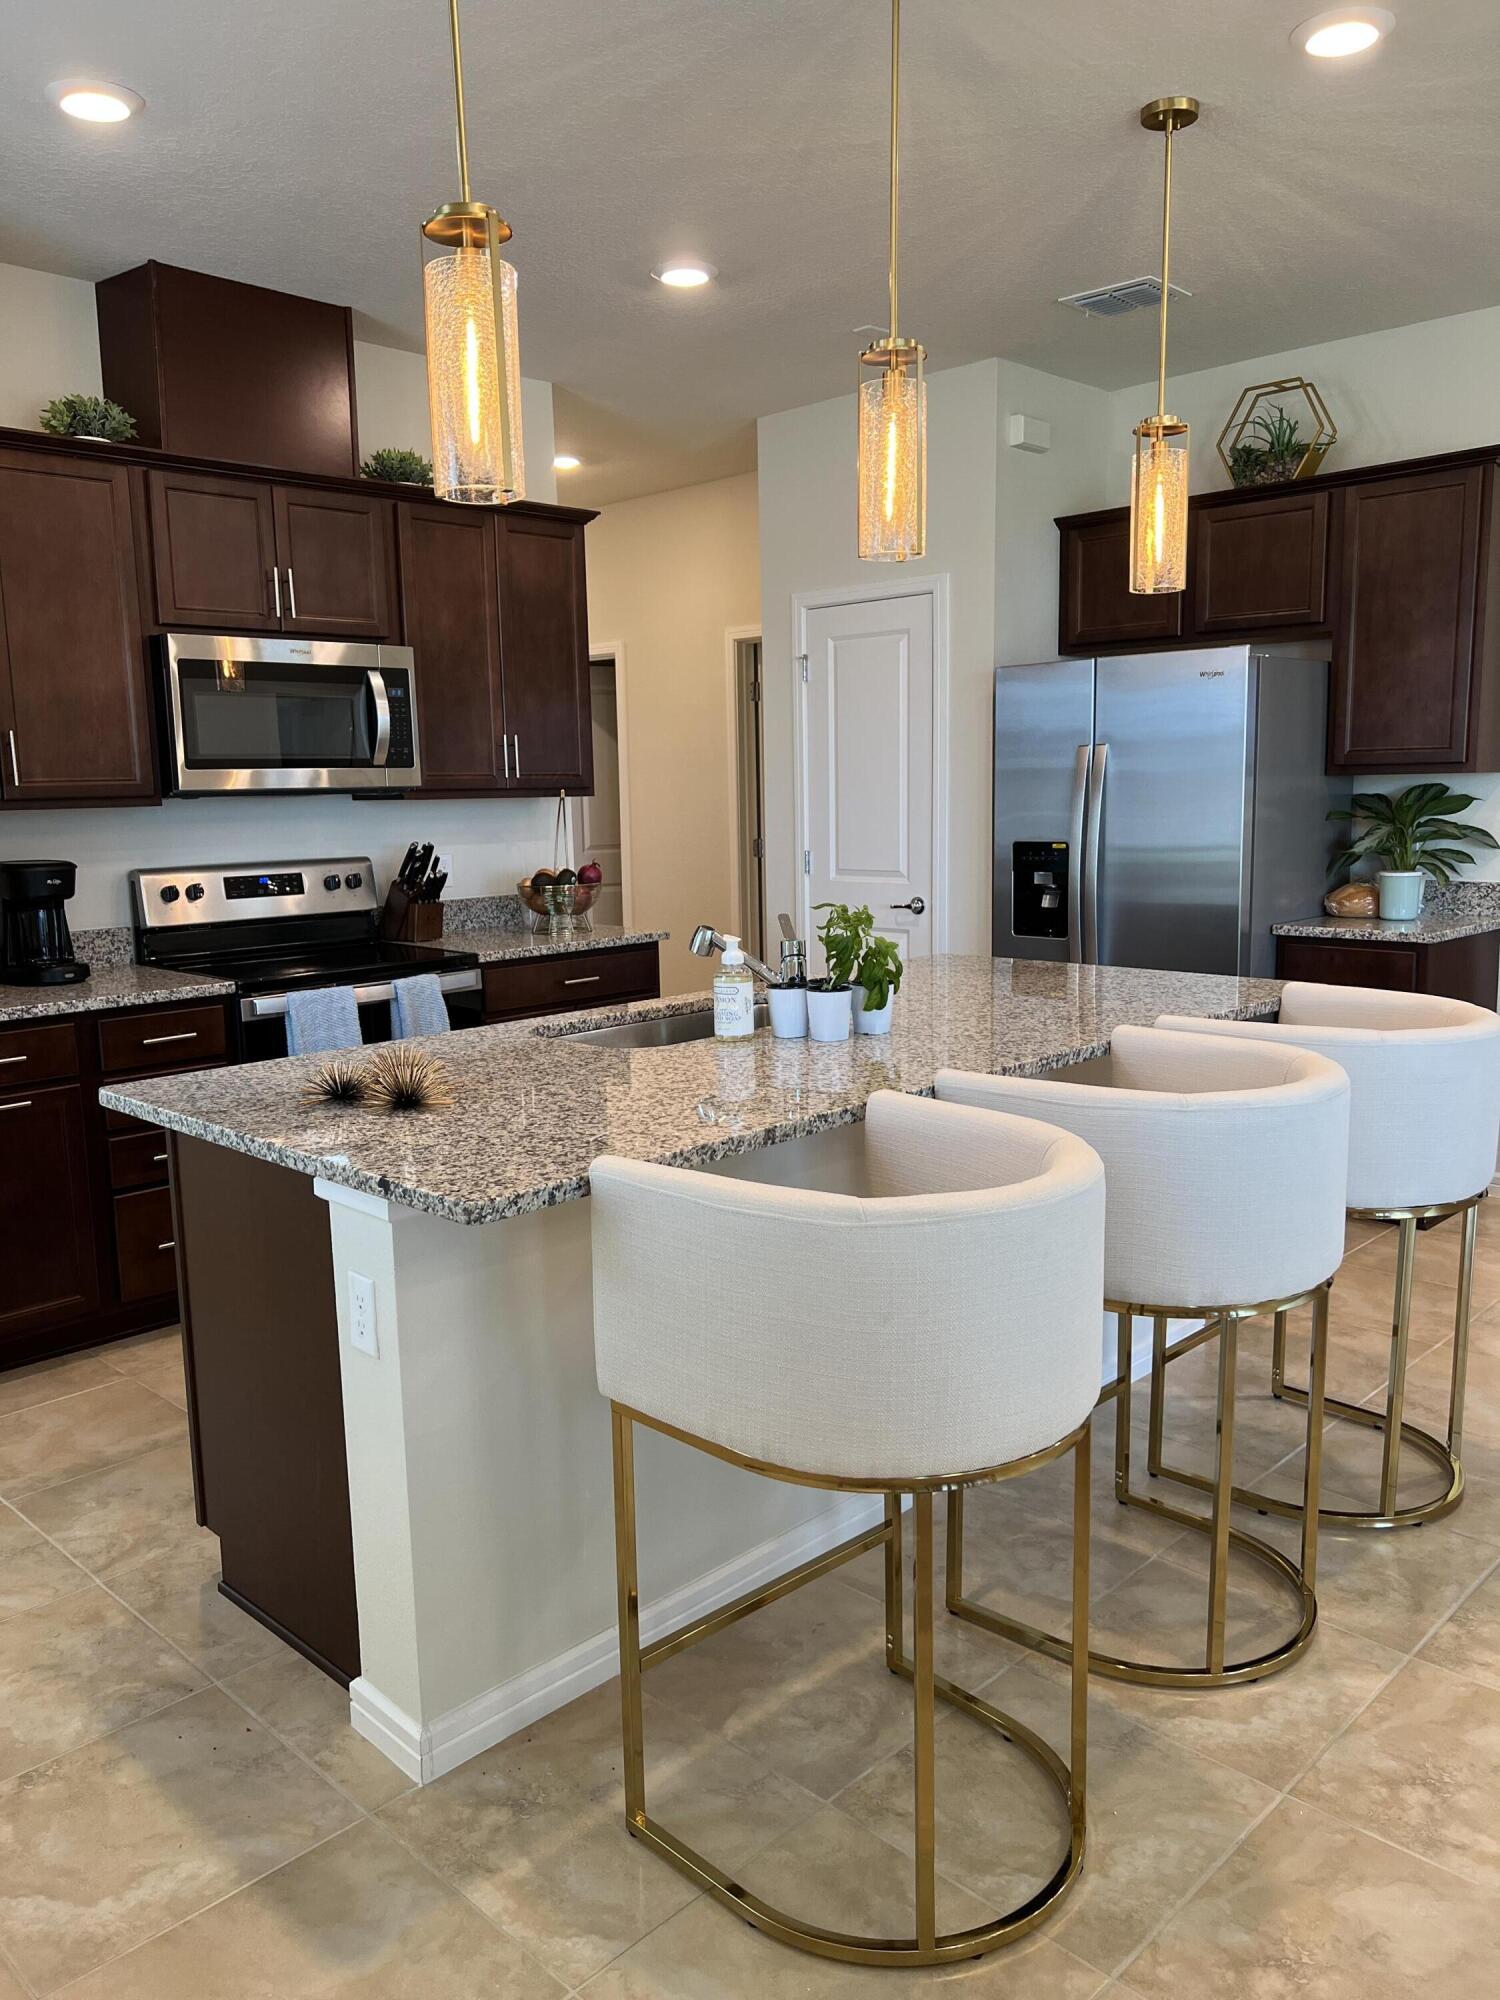 a kitchen with stainless steel appliances kitchen island granite countertop a sink a microwave and chairs